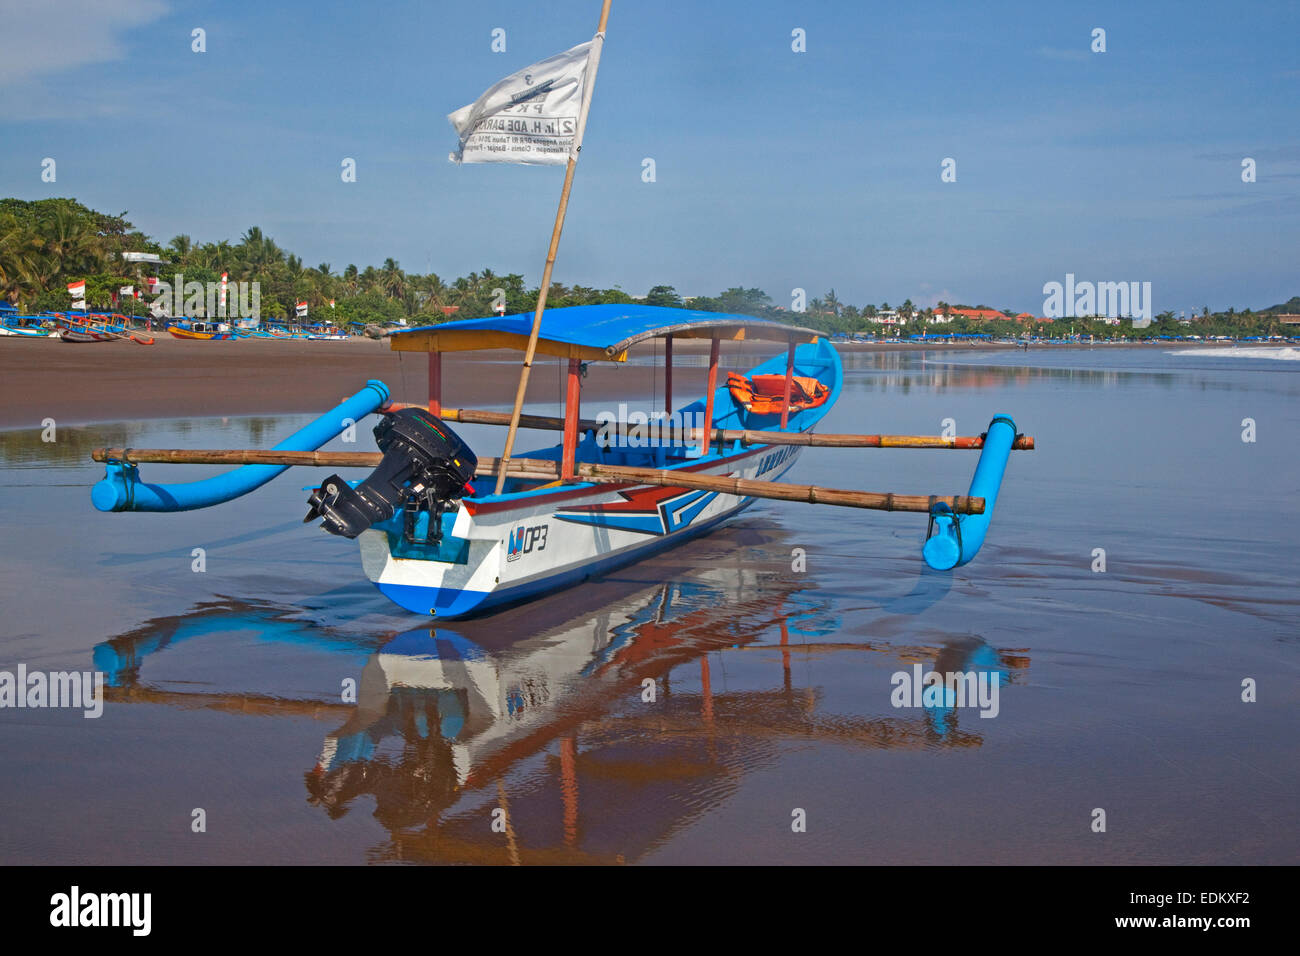 Indonesian jukung, traditional wooden outrigger canoe on 